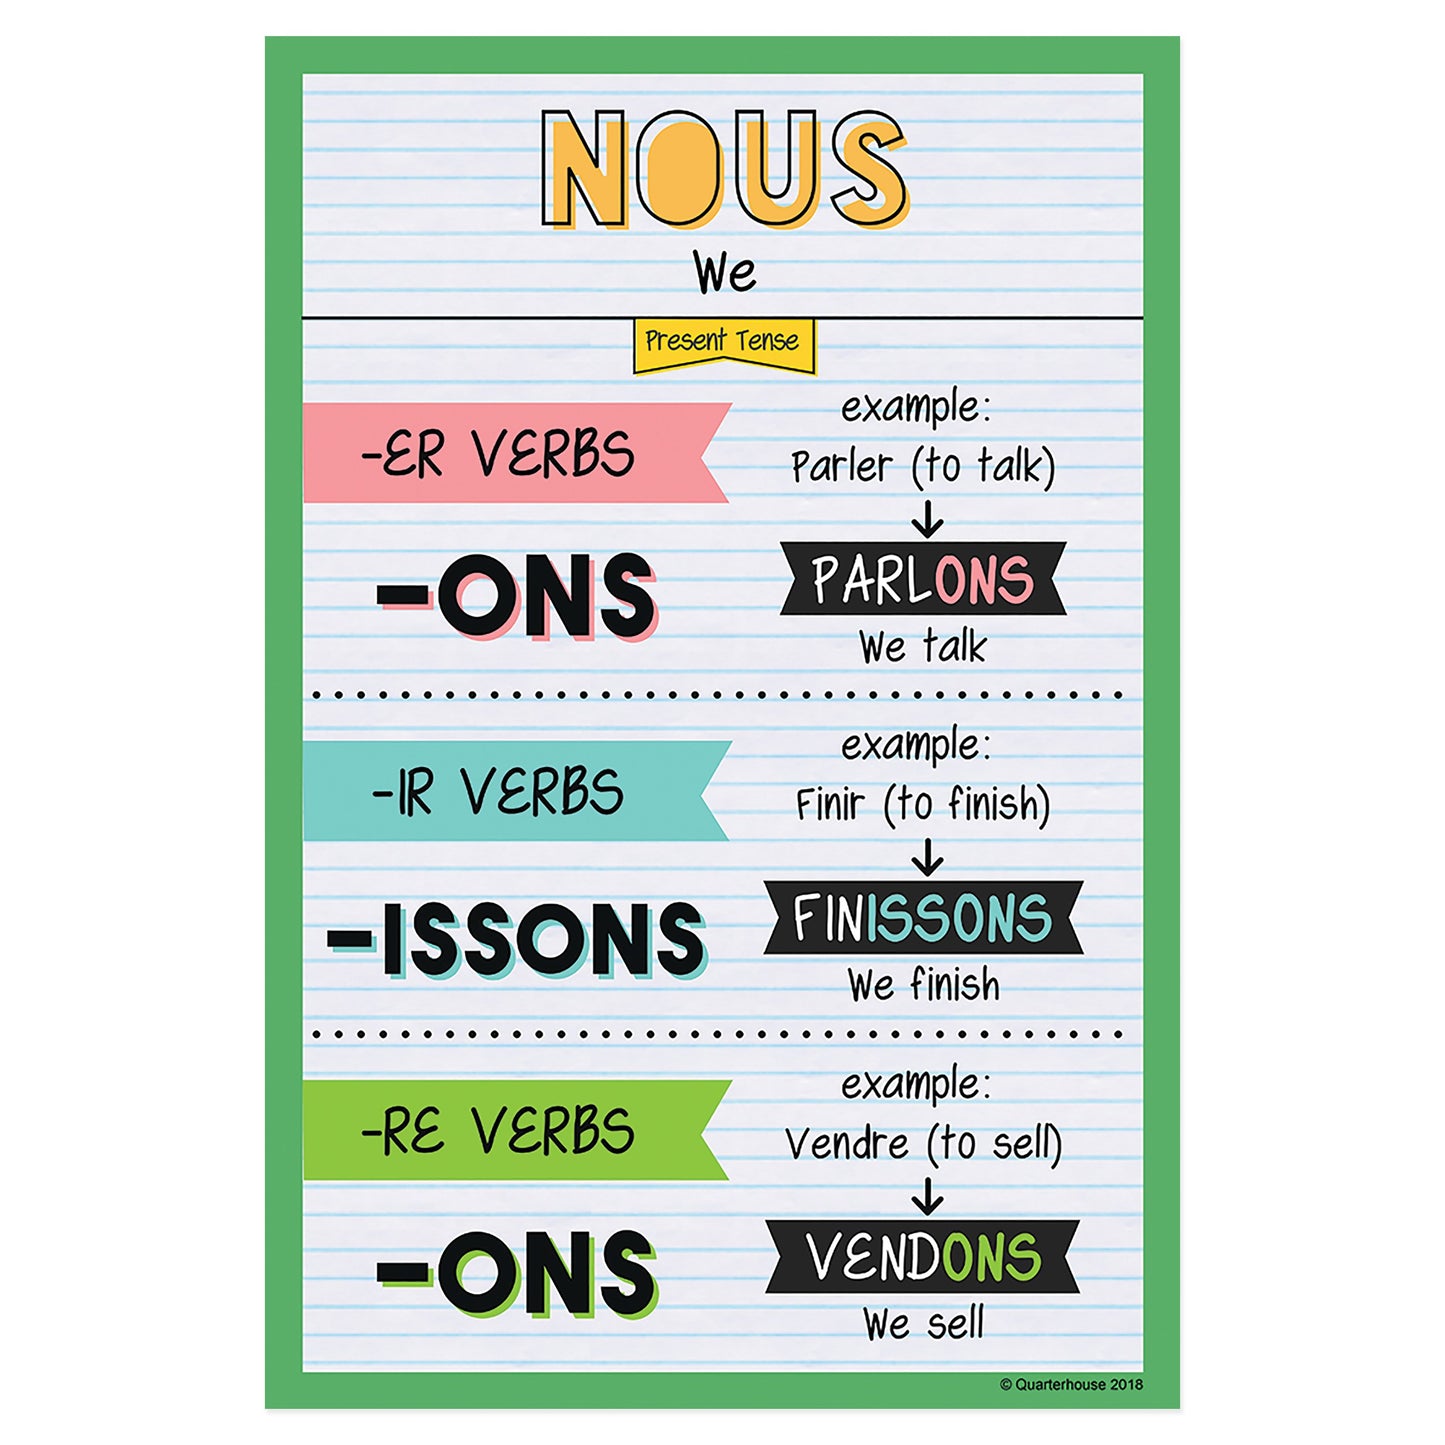 Quarterhouse Nous - Present Tense French Verb Conjugation Poster, French and ESL Classroom Materials for Teachers